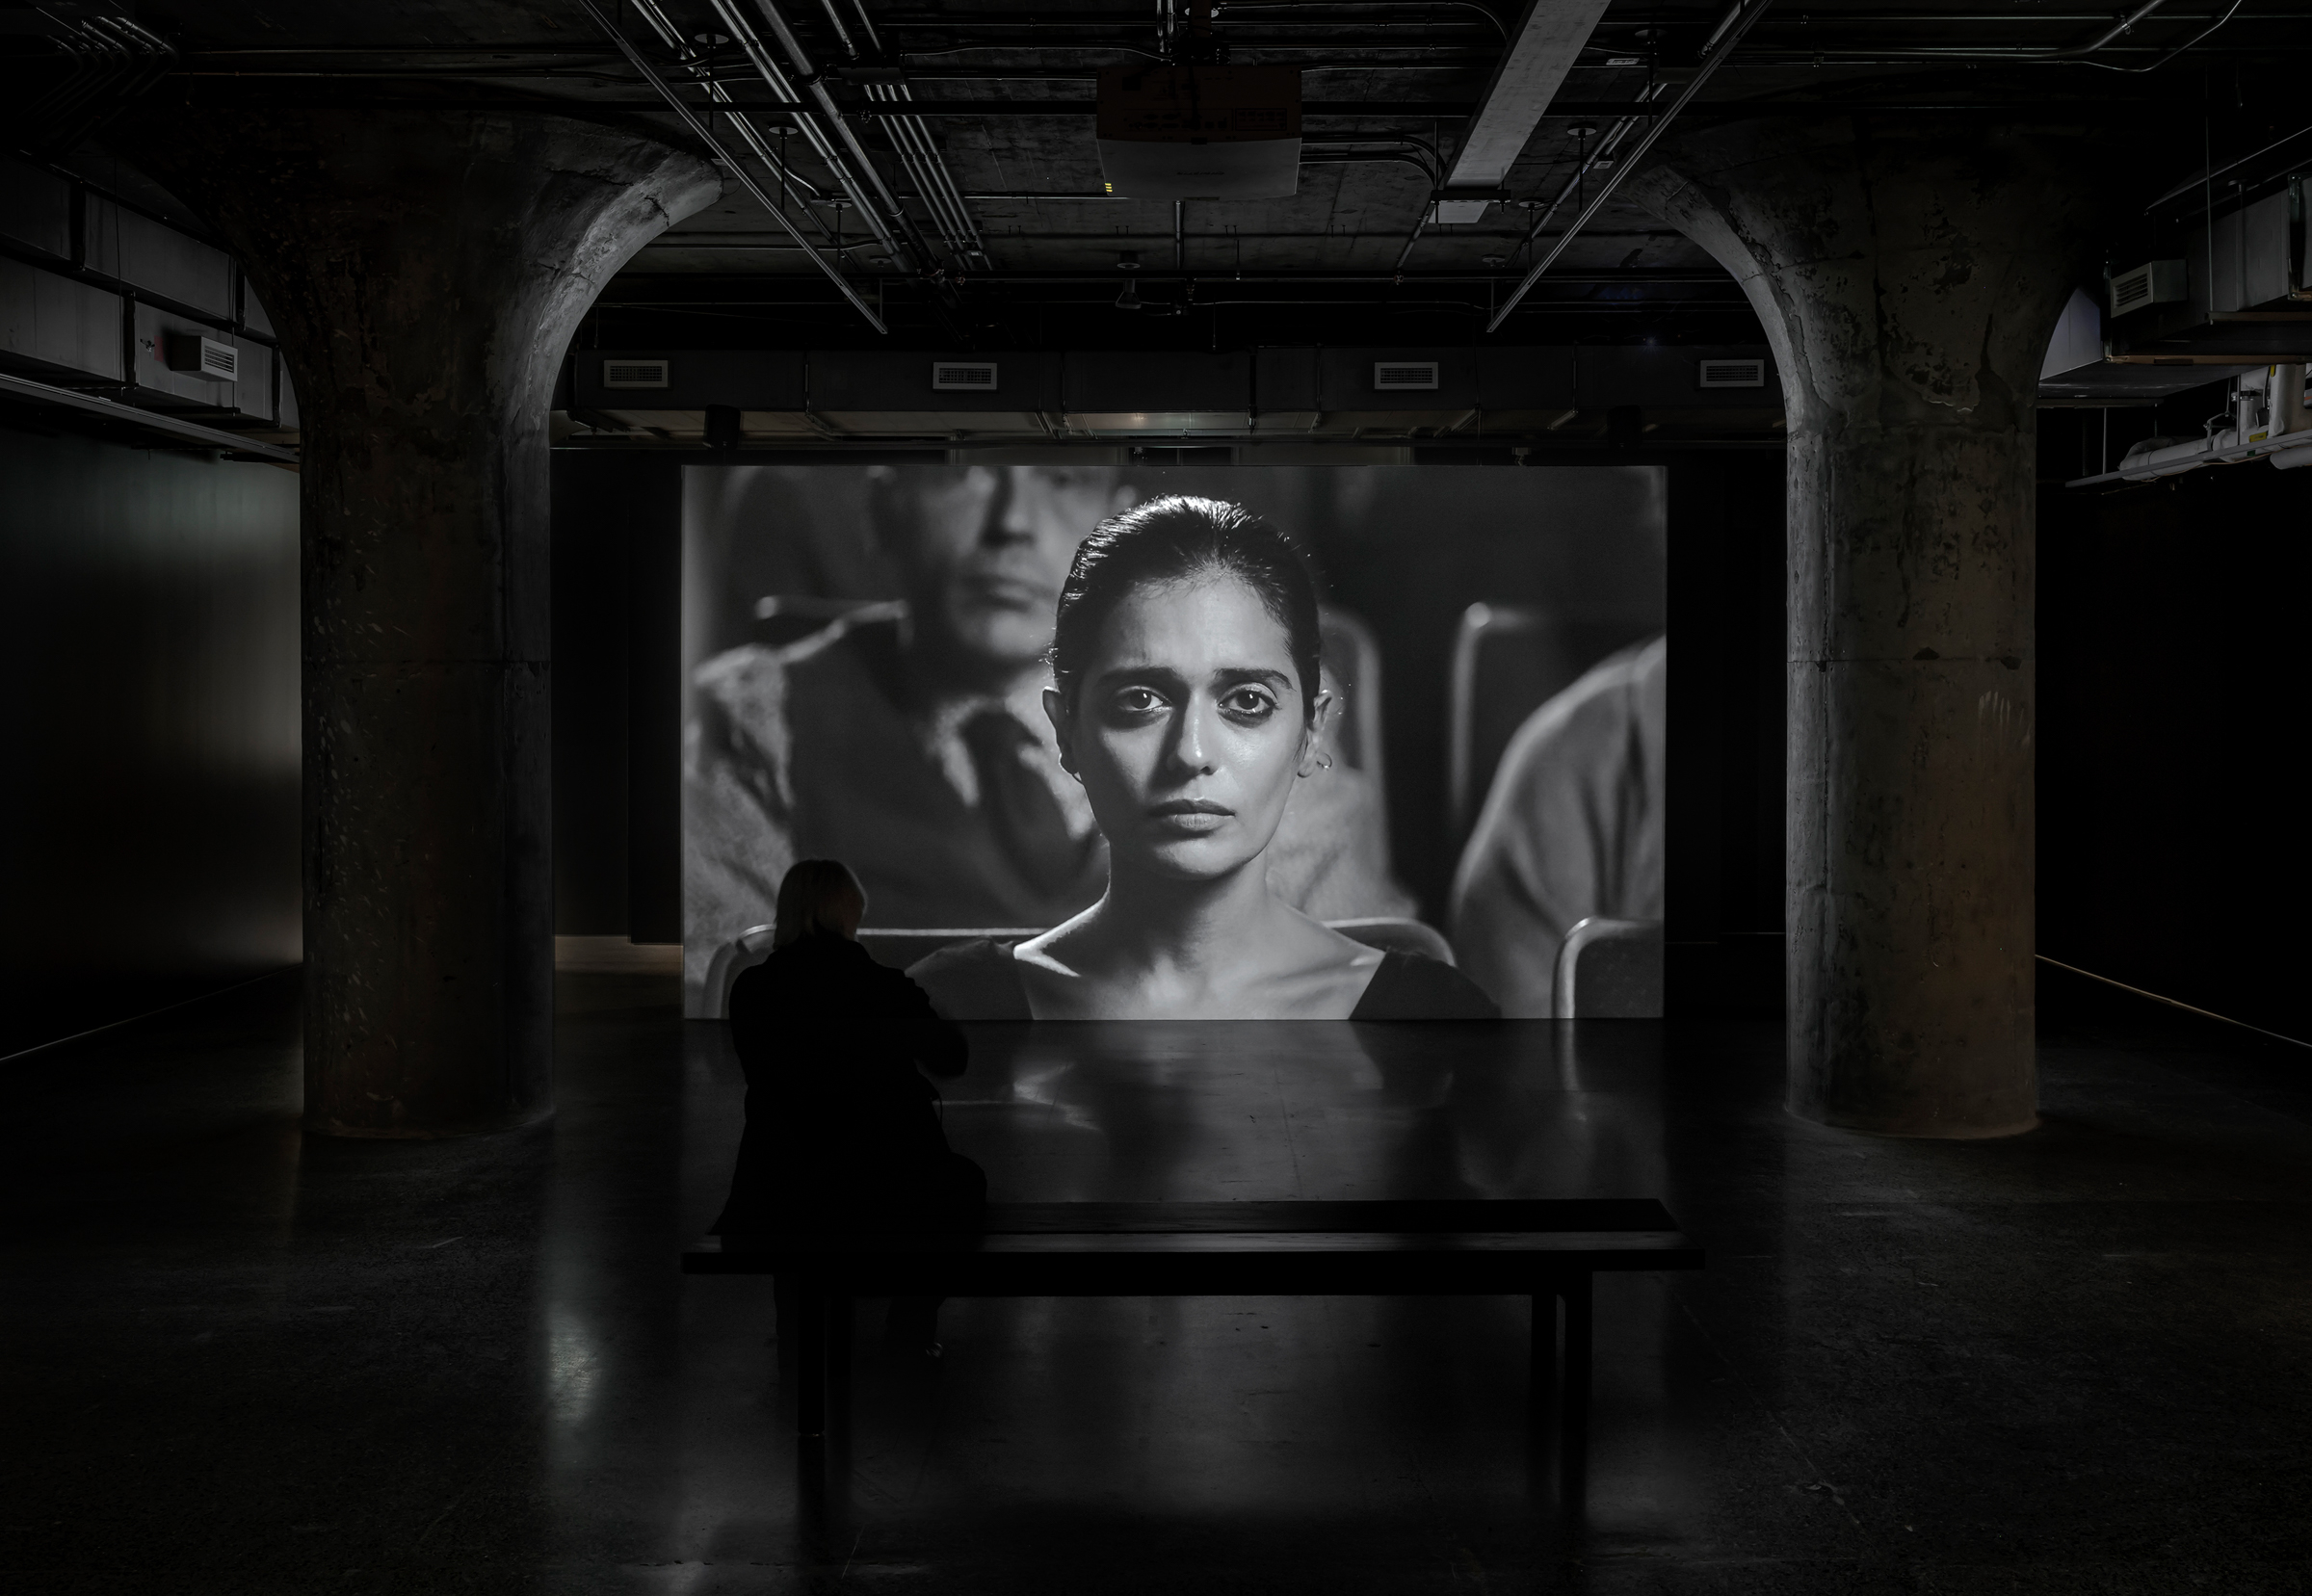     Shirin Neshat, Land of Dreams, installation view (Roja), MOCA Toronto, 2022. © Shirin Neshat. Courtesy of the artist; Gladstone Gallery, New York and Brussels; and Goodman Gallery, Johannesburg, Cape Town, and London. Photo: Toni Hafkenscheid

